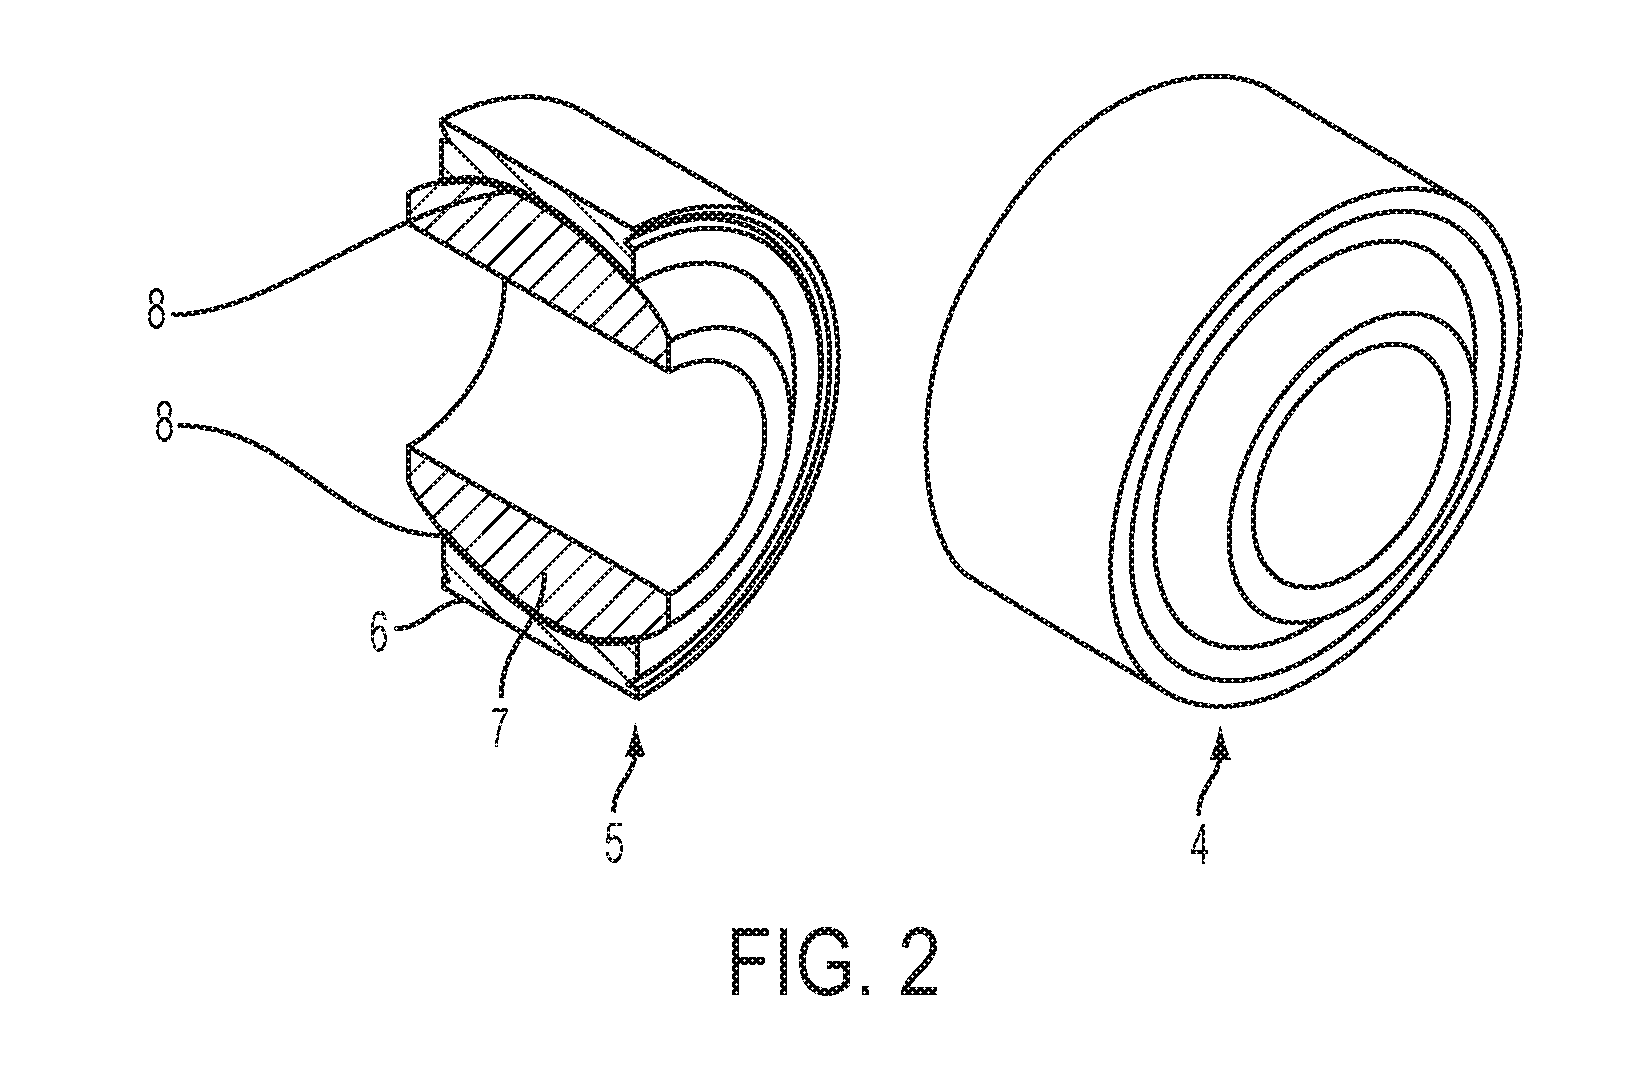 Self-lubricated bearing compositions and methods of making the same